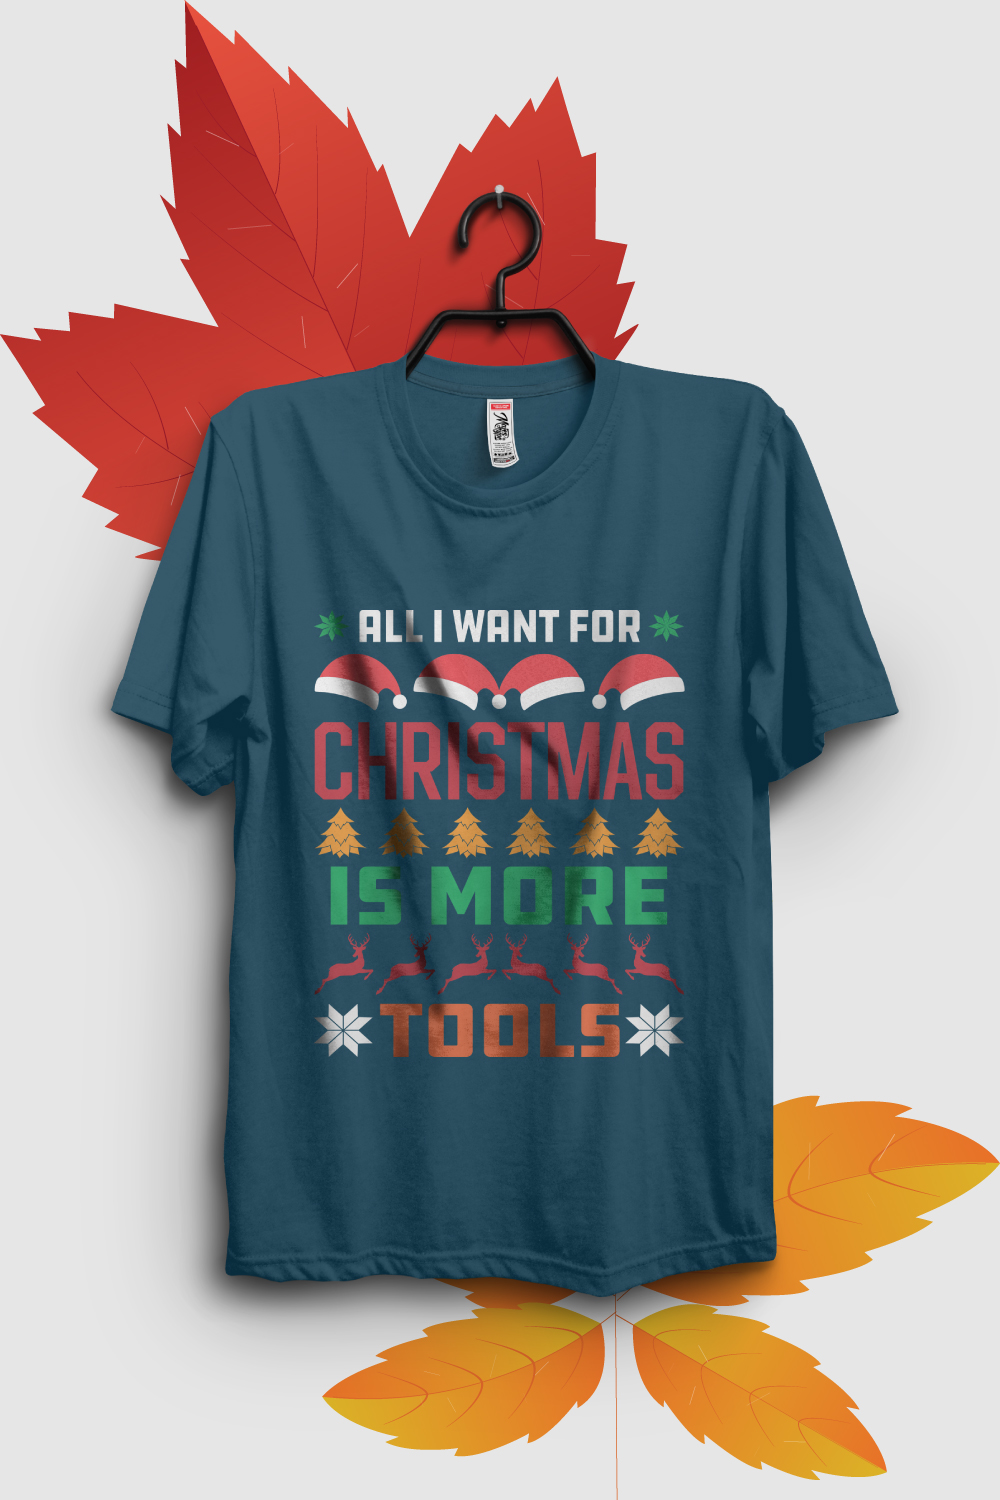 All I want for Christmas is more tools t-shirt design pinterest preview image.